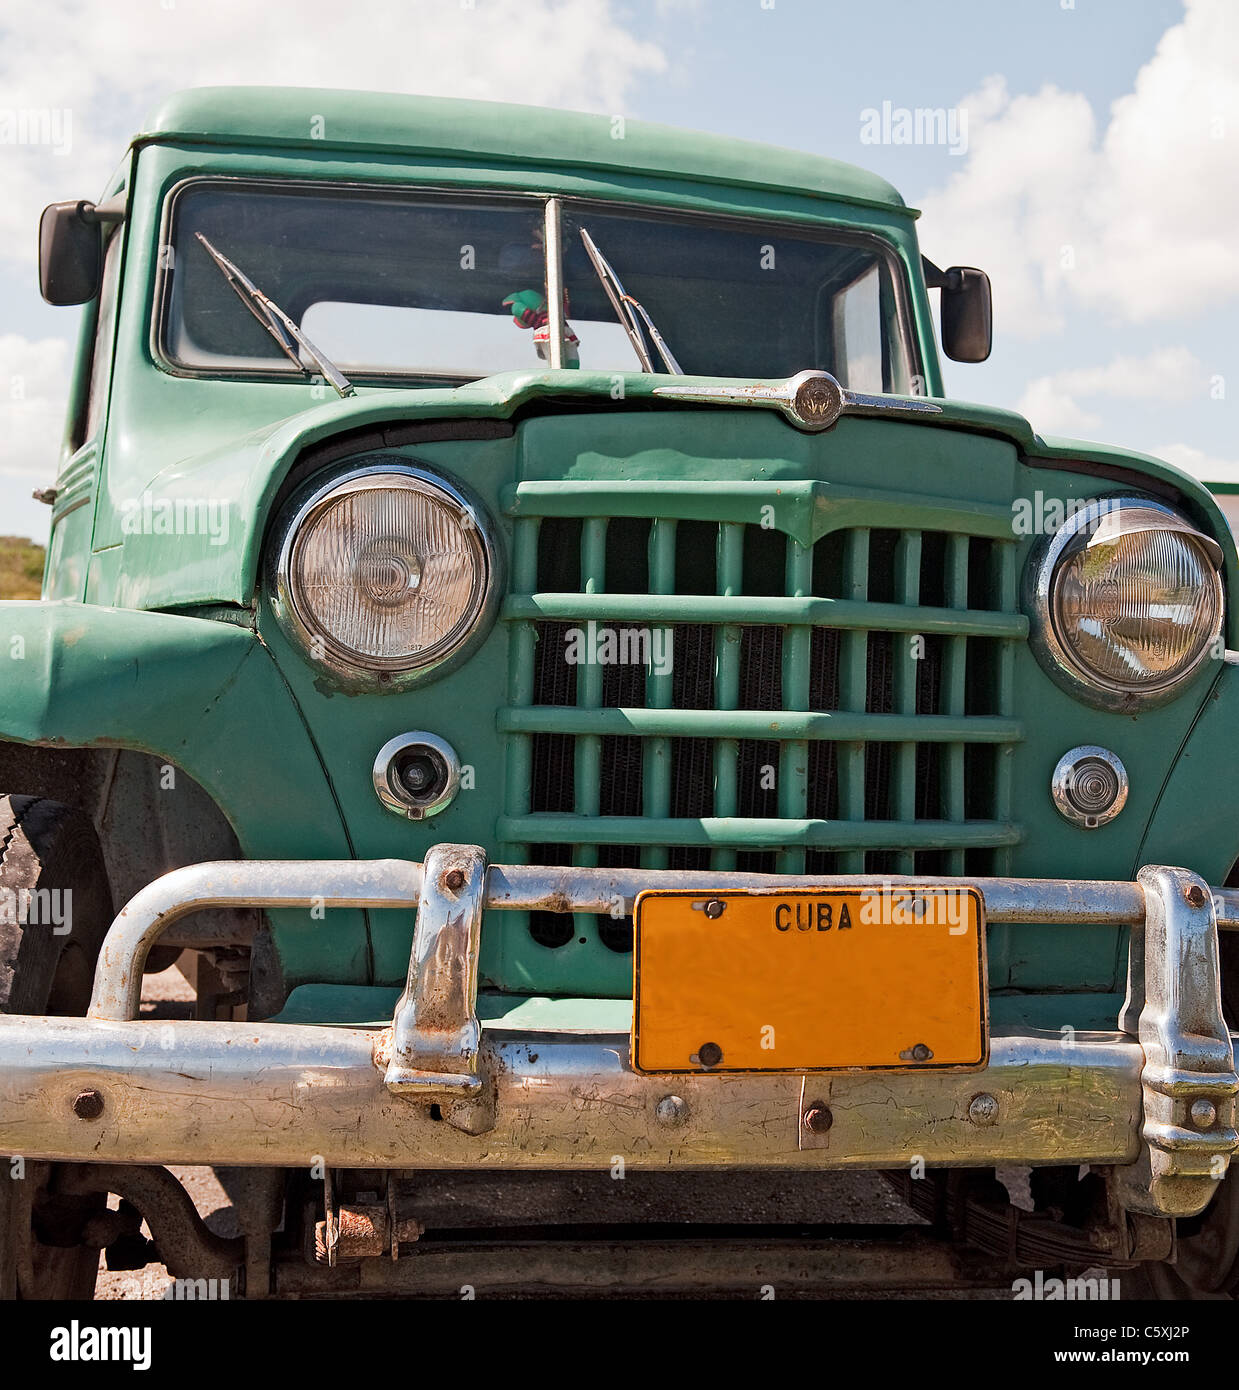 Classic green truck front view with cuba licence plate Stock Photo